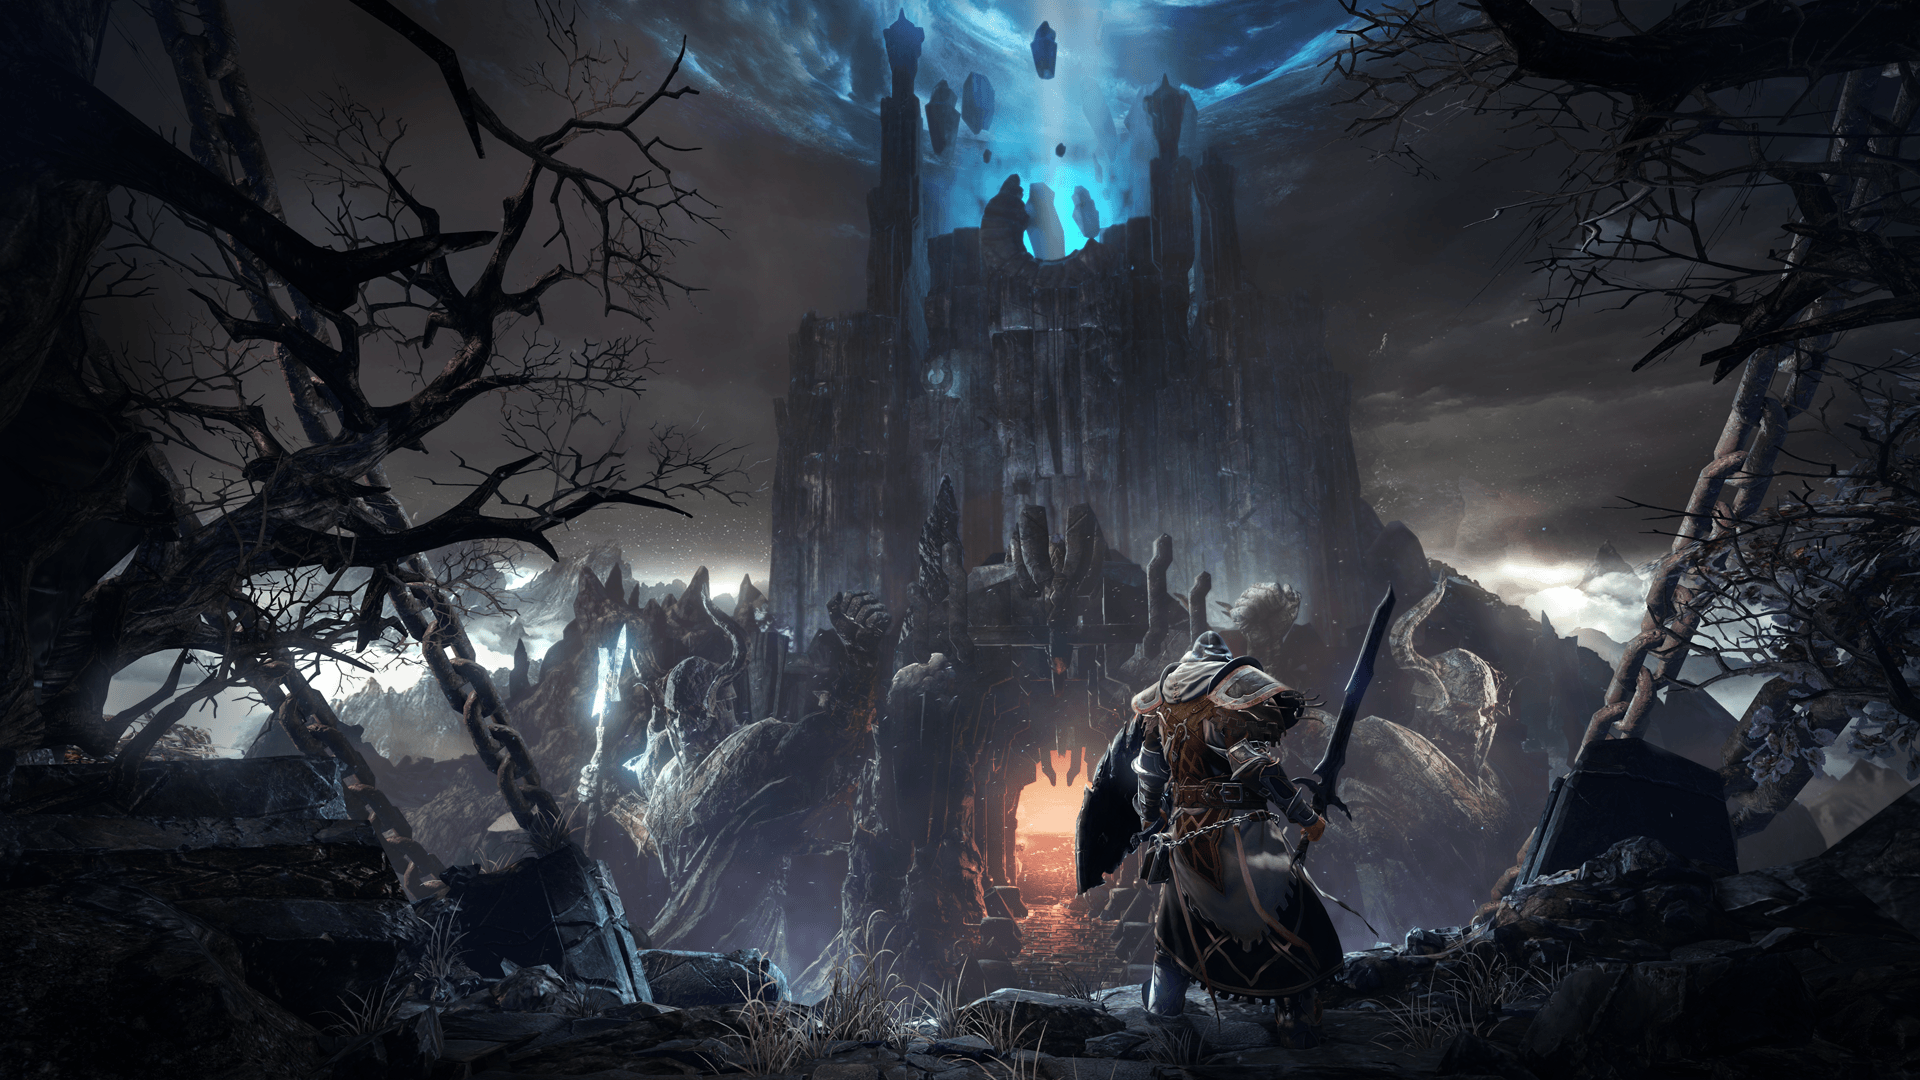 Lords of the Fallen Wallpaper 4K, 2023, PC Games, PlayStation 5